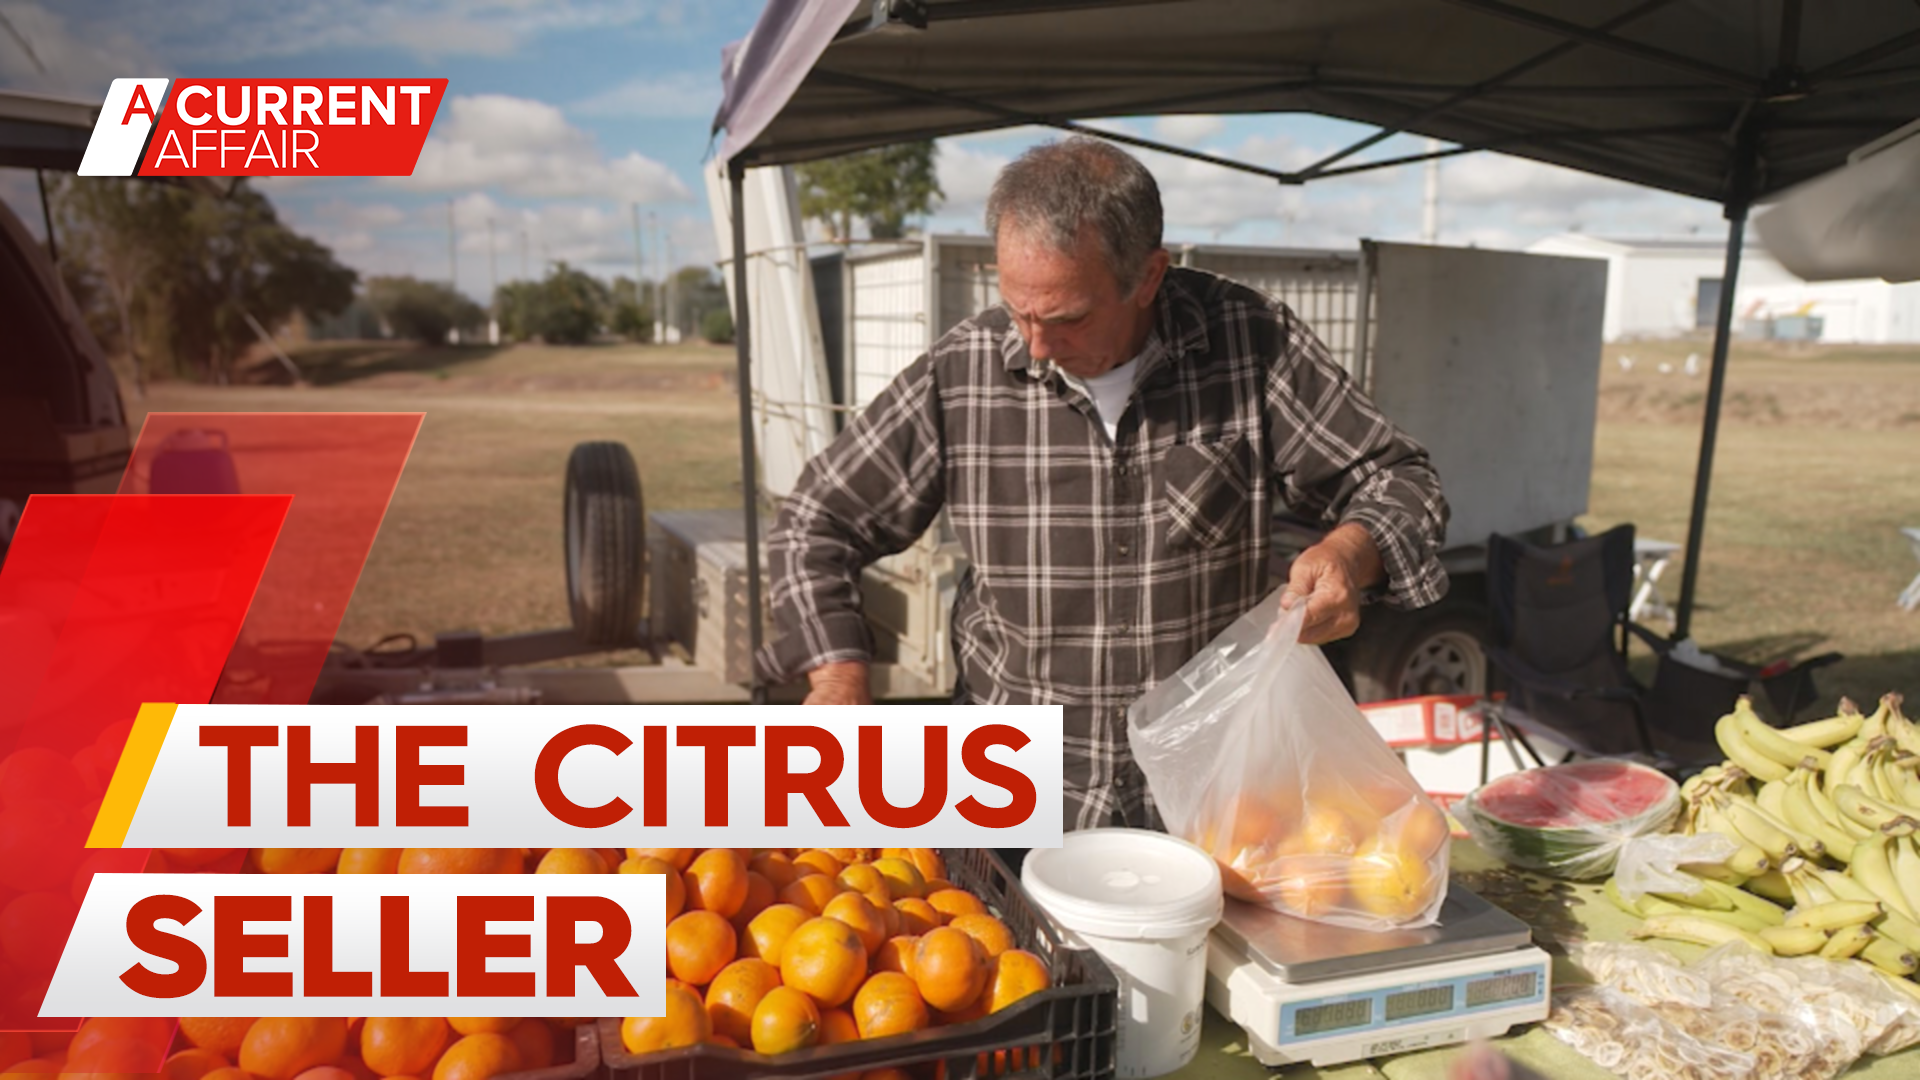 Queensland pensioner in sour council squabble over roadside fruit stall